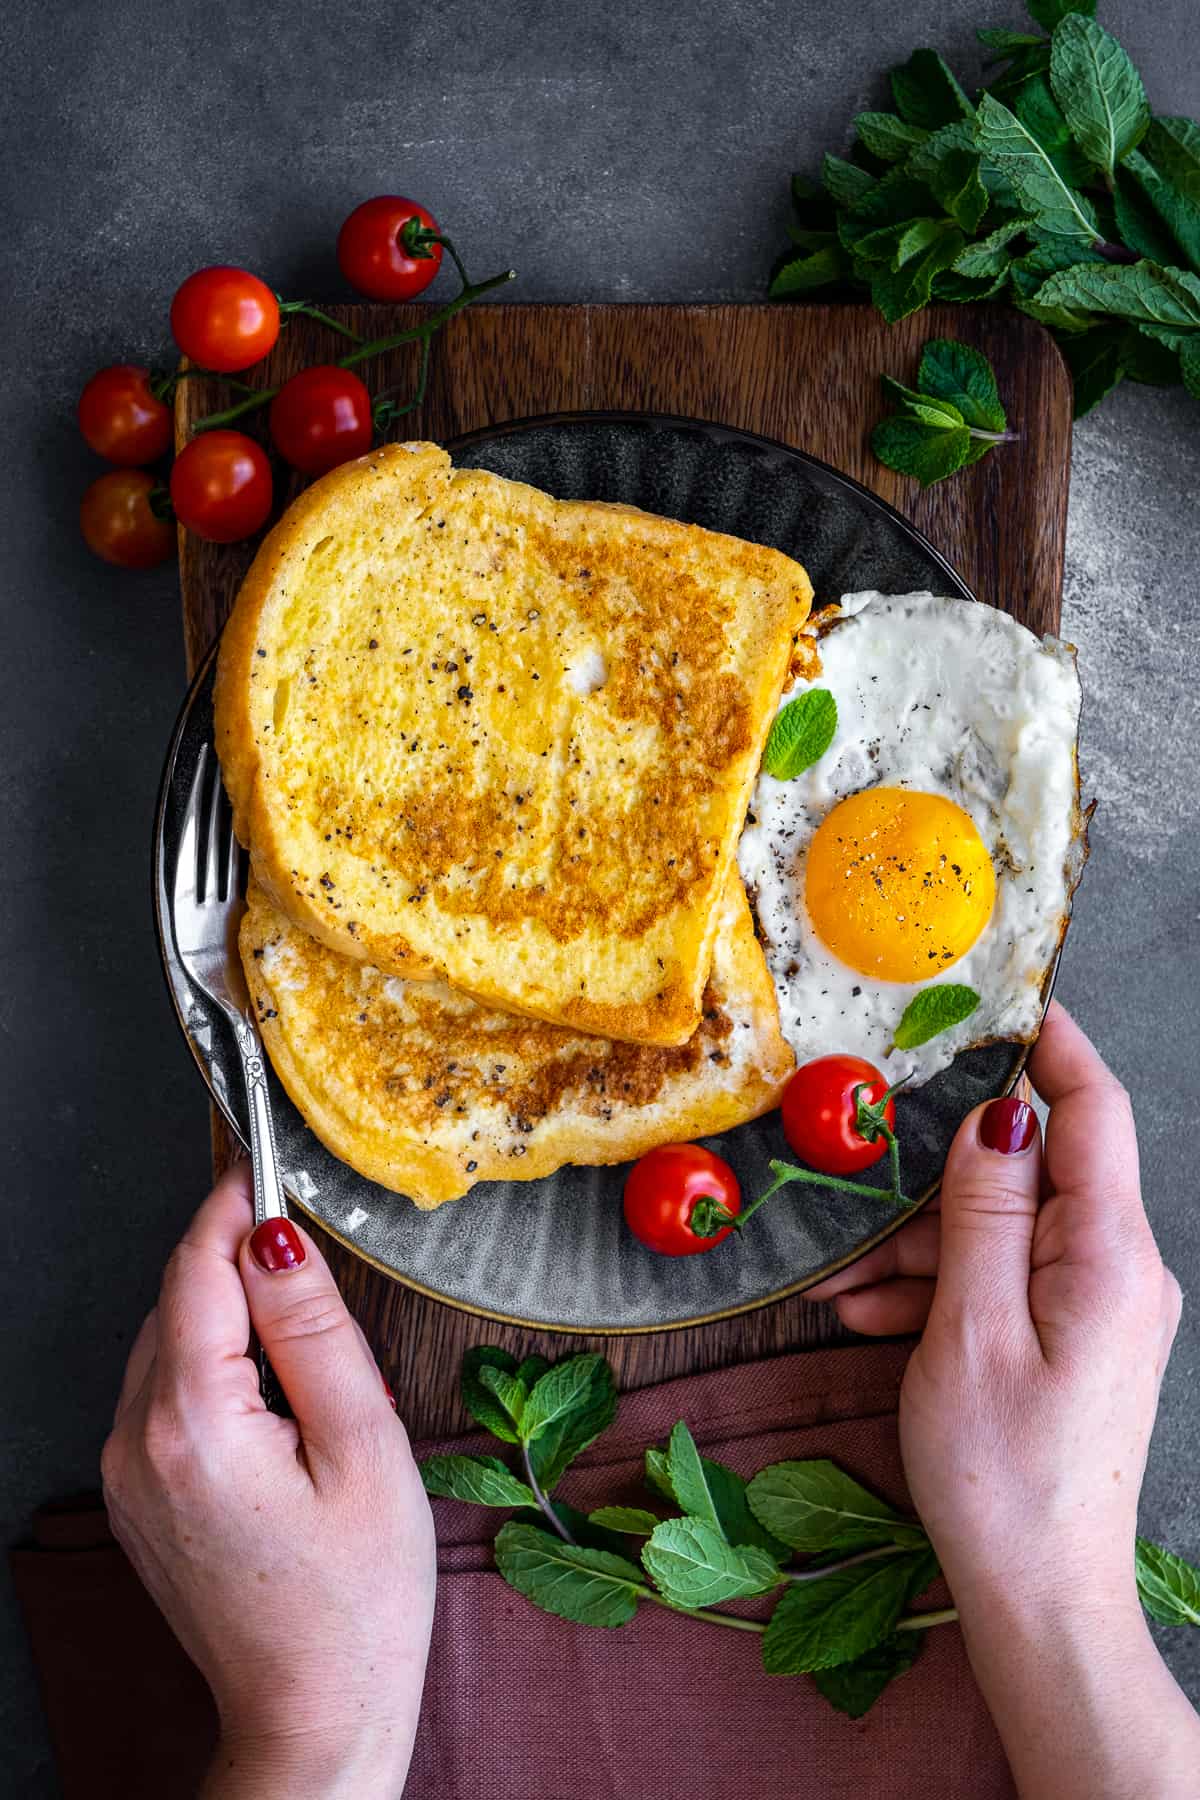 Woman about to eat eggy bread served with fried egg and cherry tomatoes on a grey colored plate.